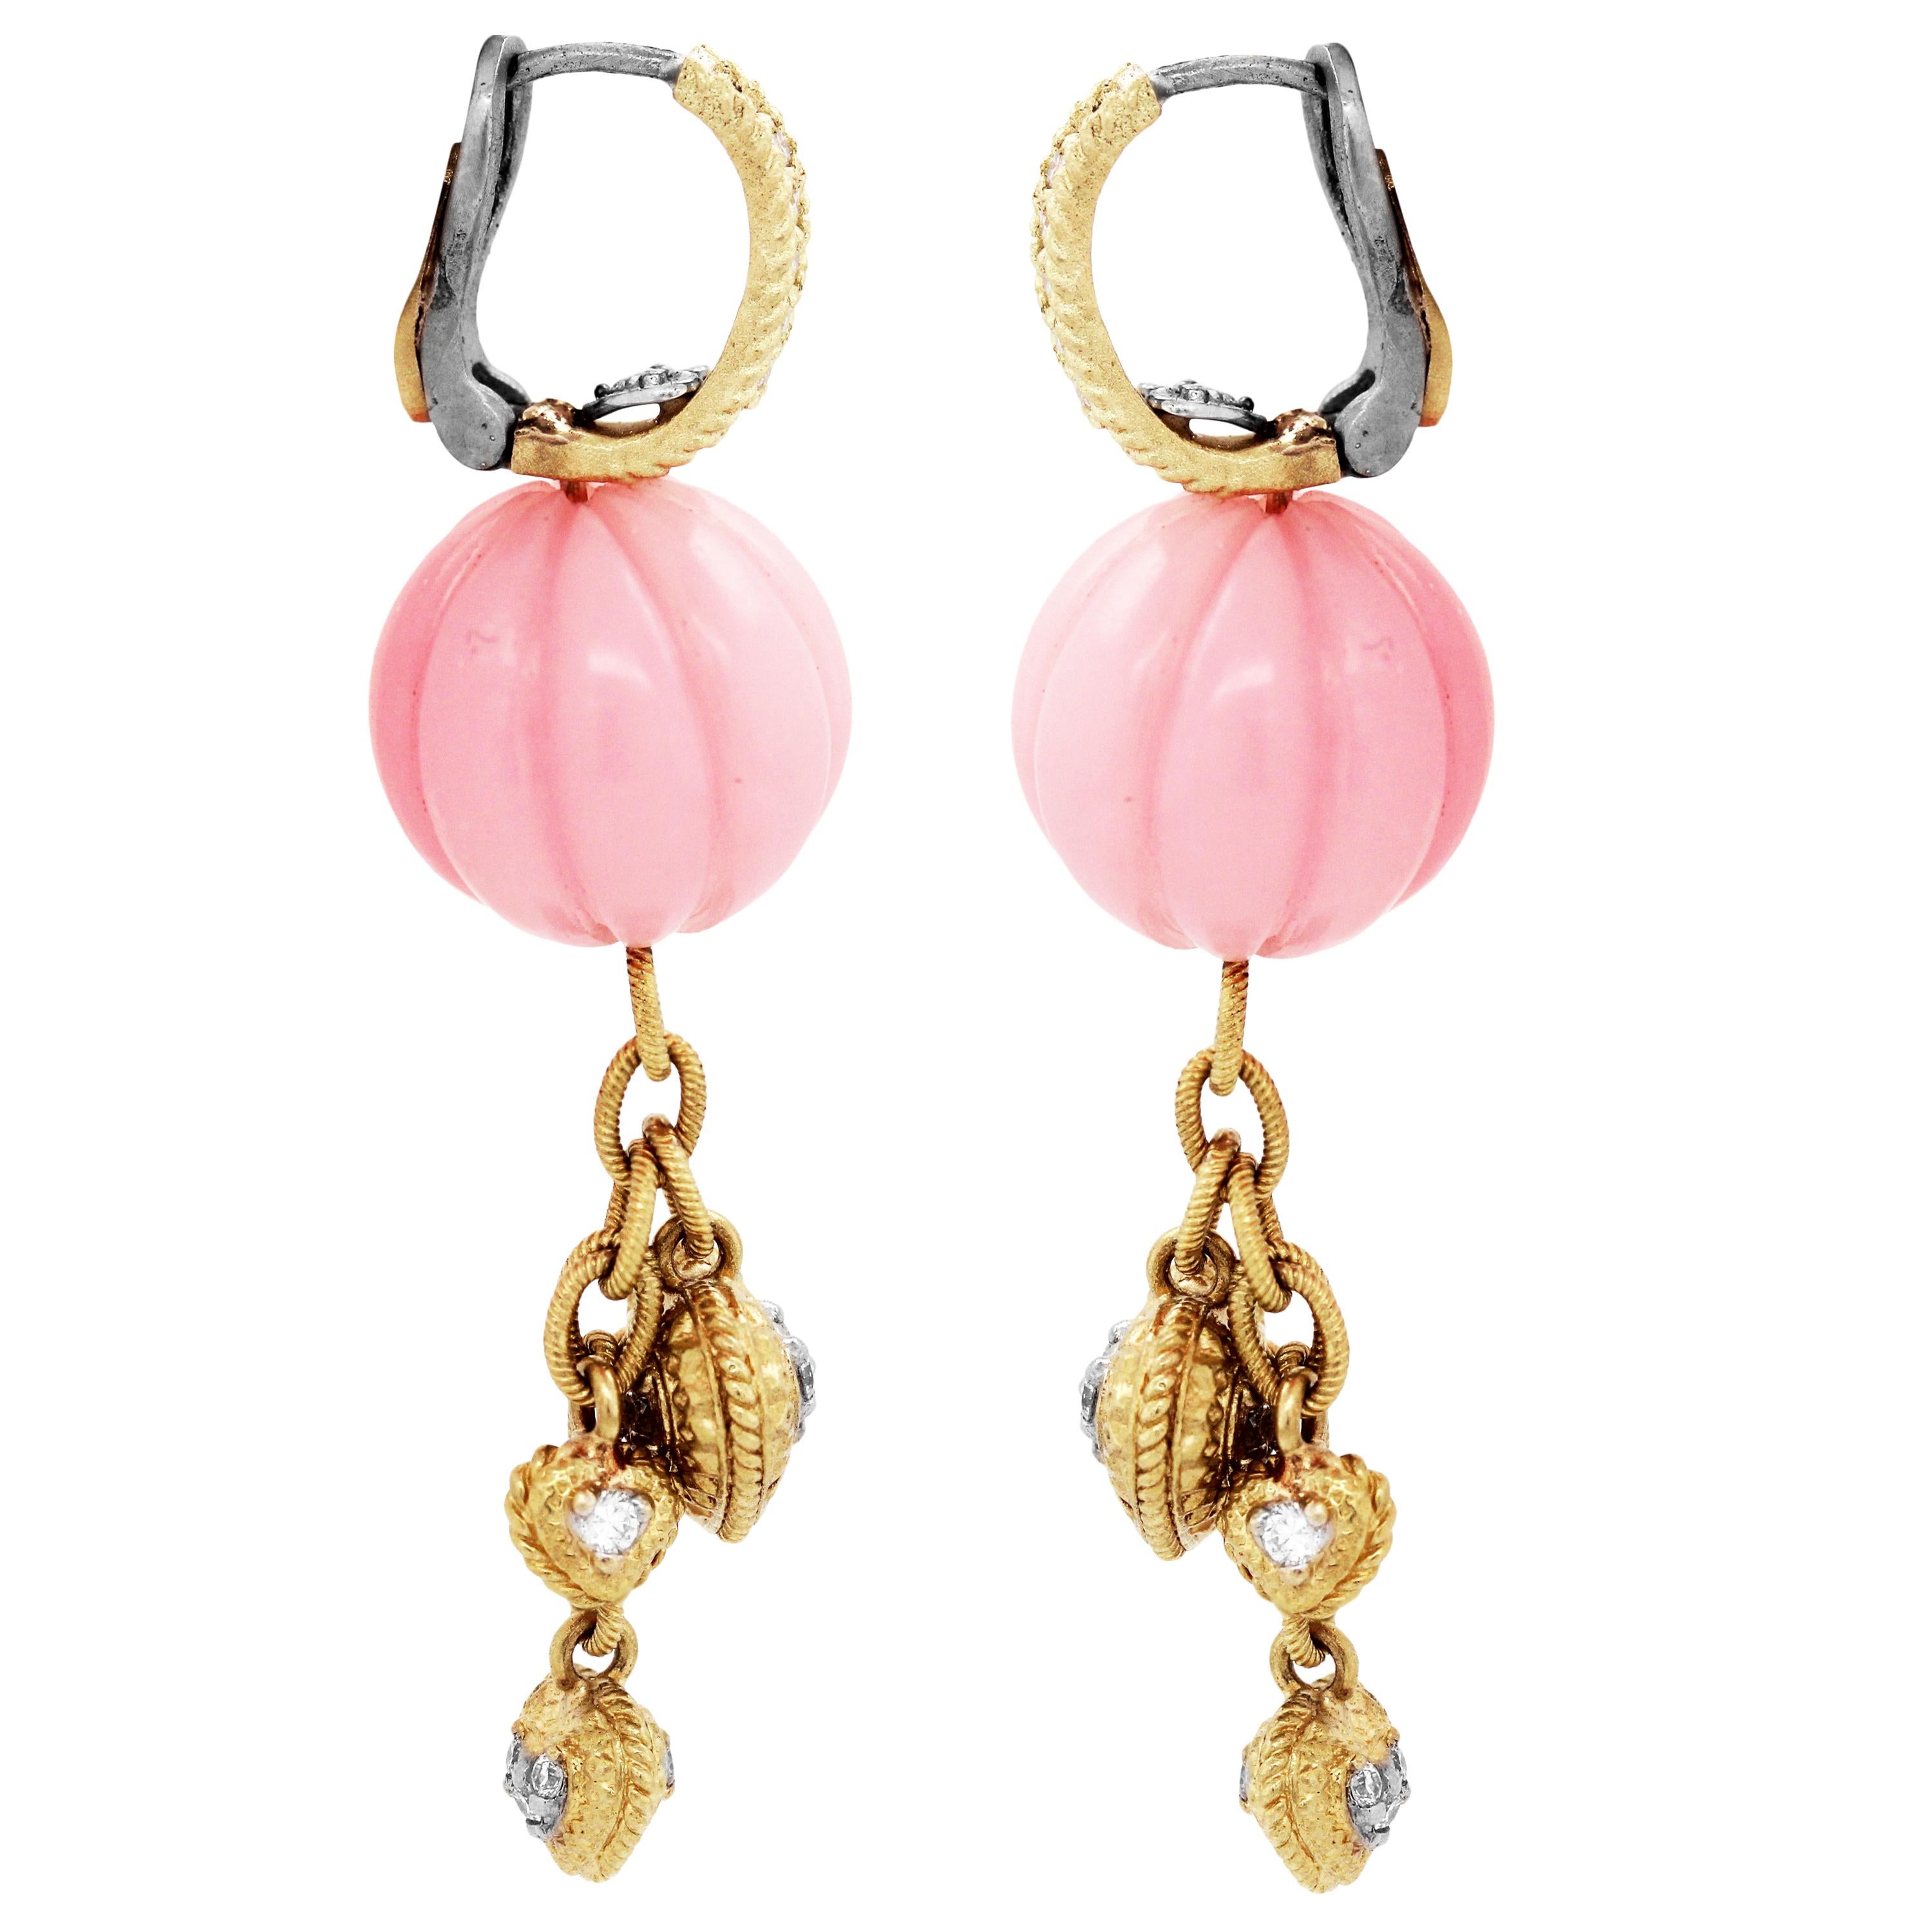 18K Yellow Gold and Diamond Drop Earrings with Dangling Hearts and Pink Peruvian Opals by Stambolian

These state-of-the-art earrings make for a fun addition to any outfit with the vibrant and joyful Pink Peruvian Opals and gold combination.

The